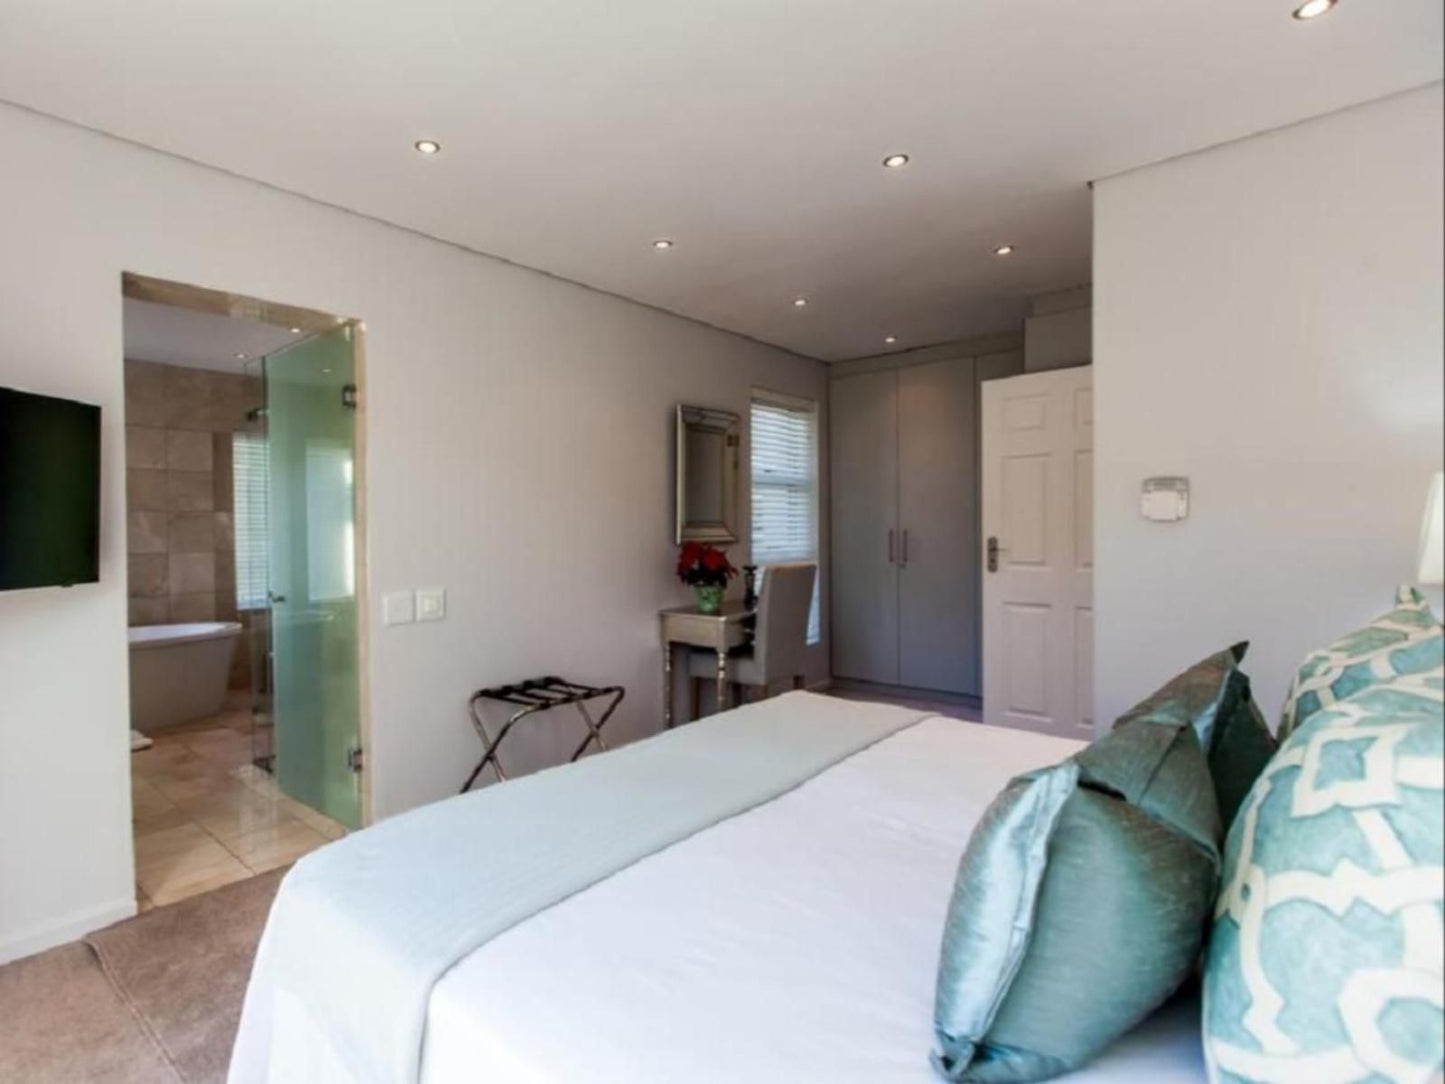 Villa On 1St Crescent Camps Bay Cape Town Western Cape South Africa Bedroom